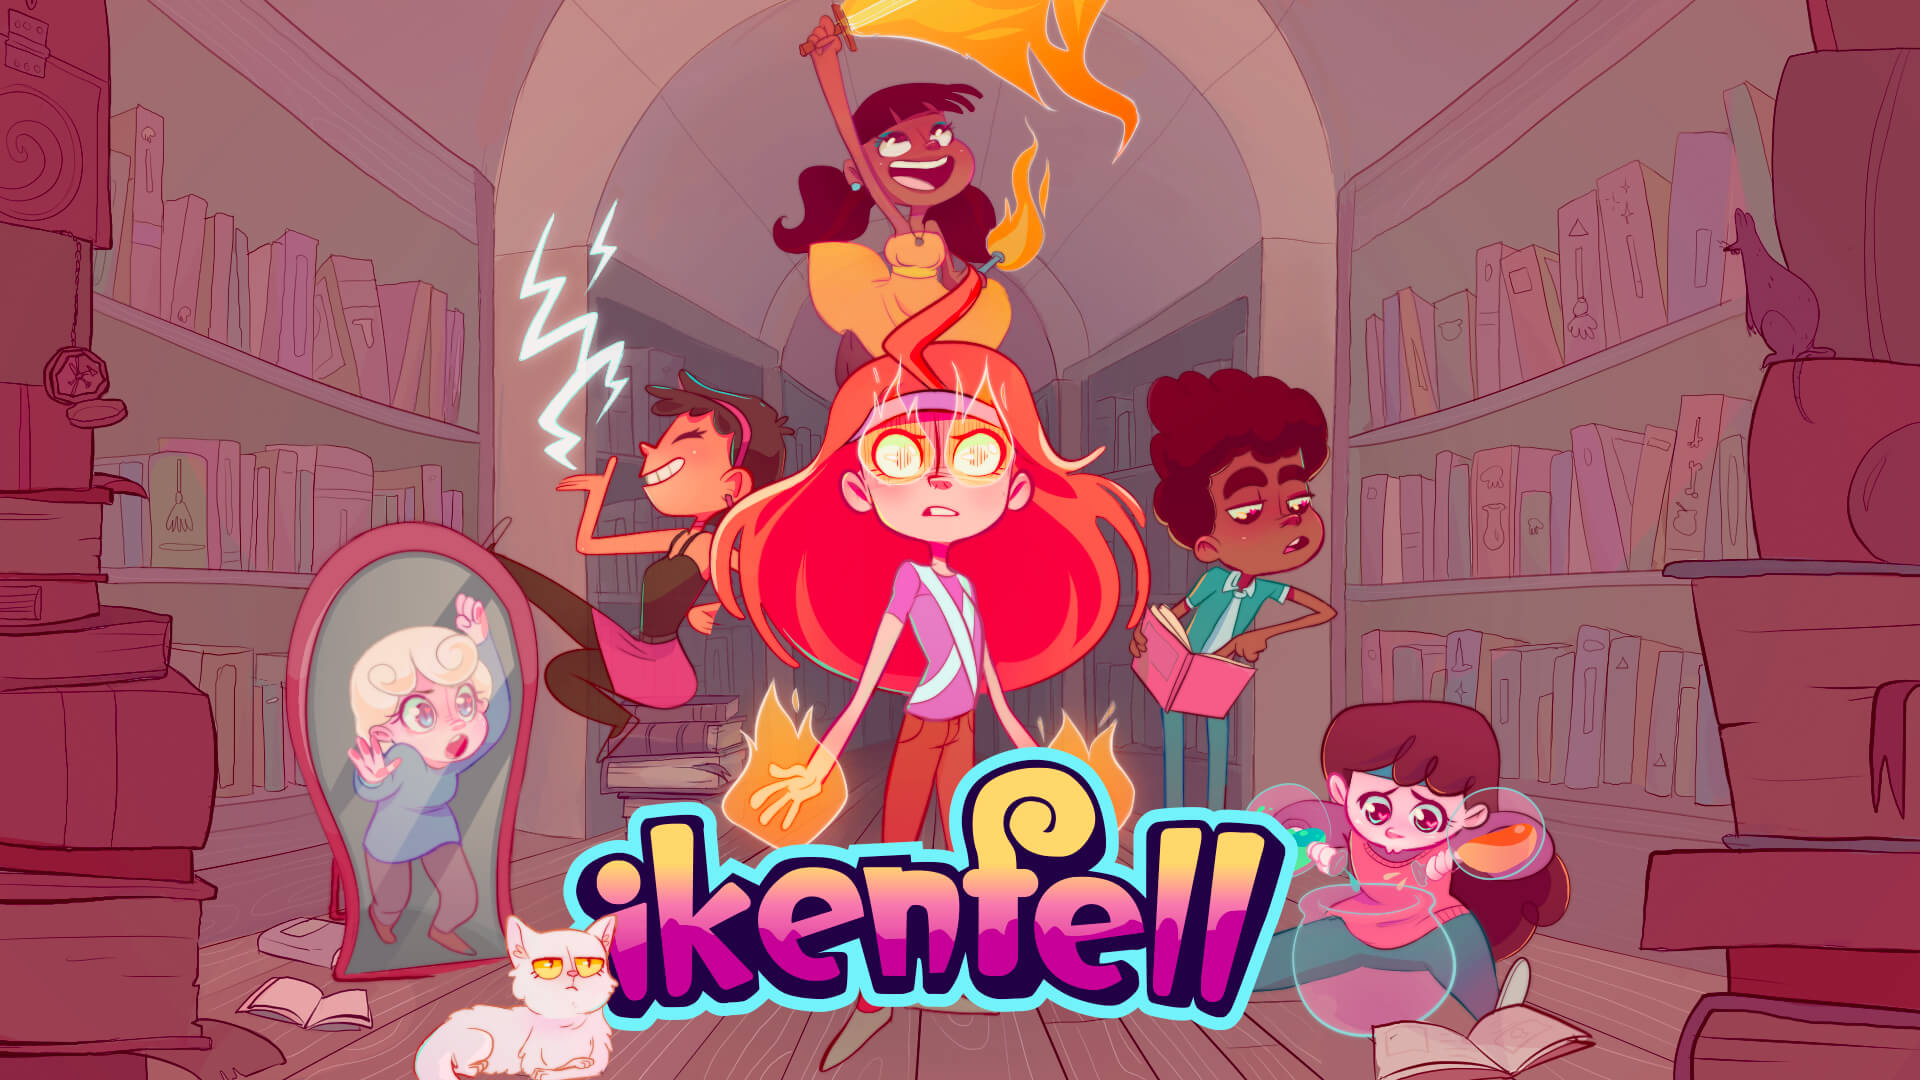 Ikenfell — Happy Ray Games / Humble Games